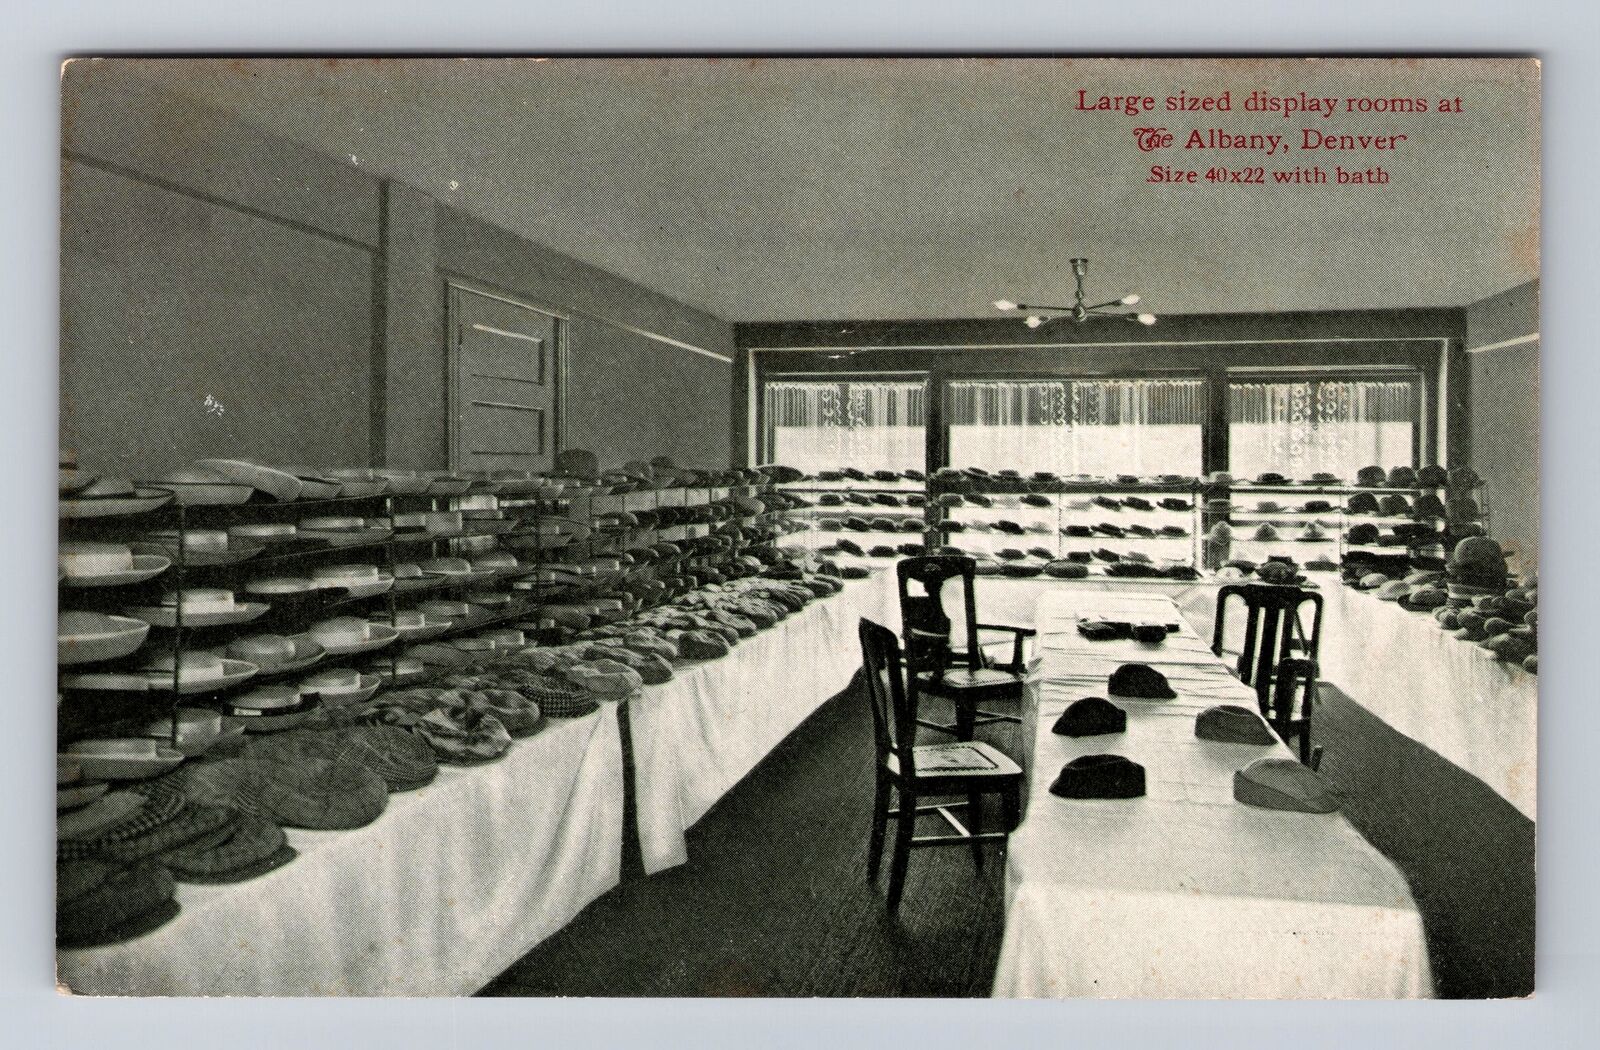 Denver CO-Colorado, Large Sized Display Rooms, The Albany, Vintage Postcard